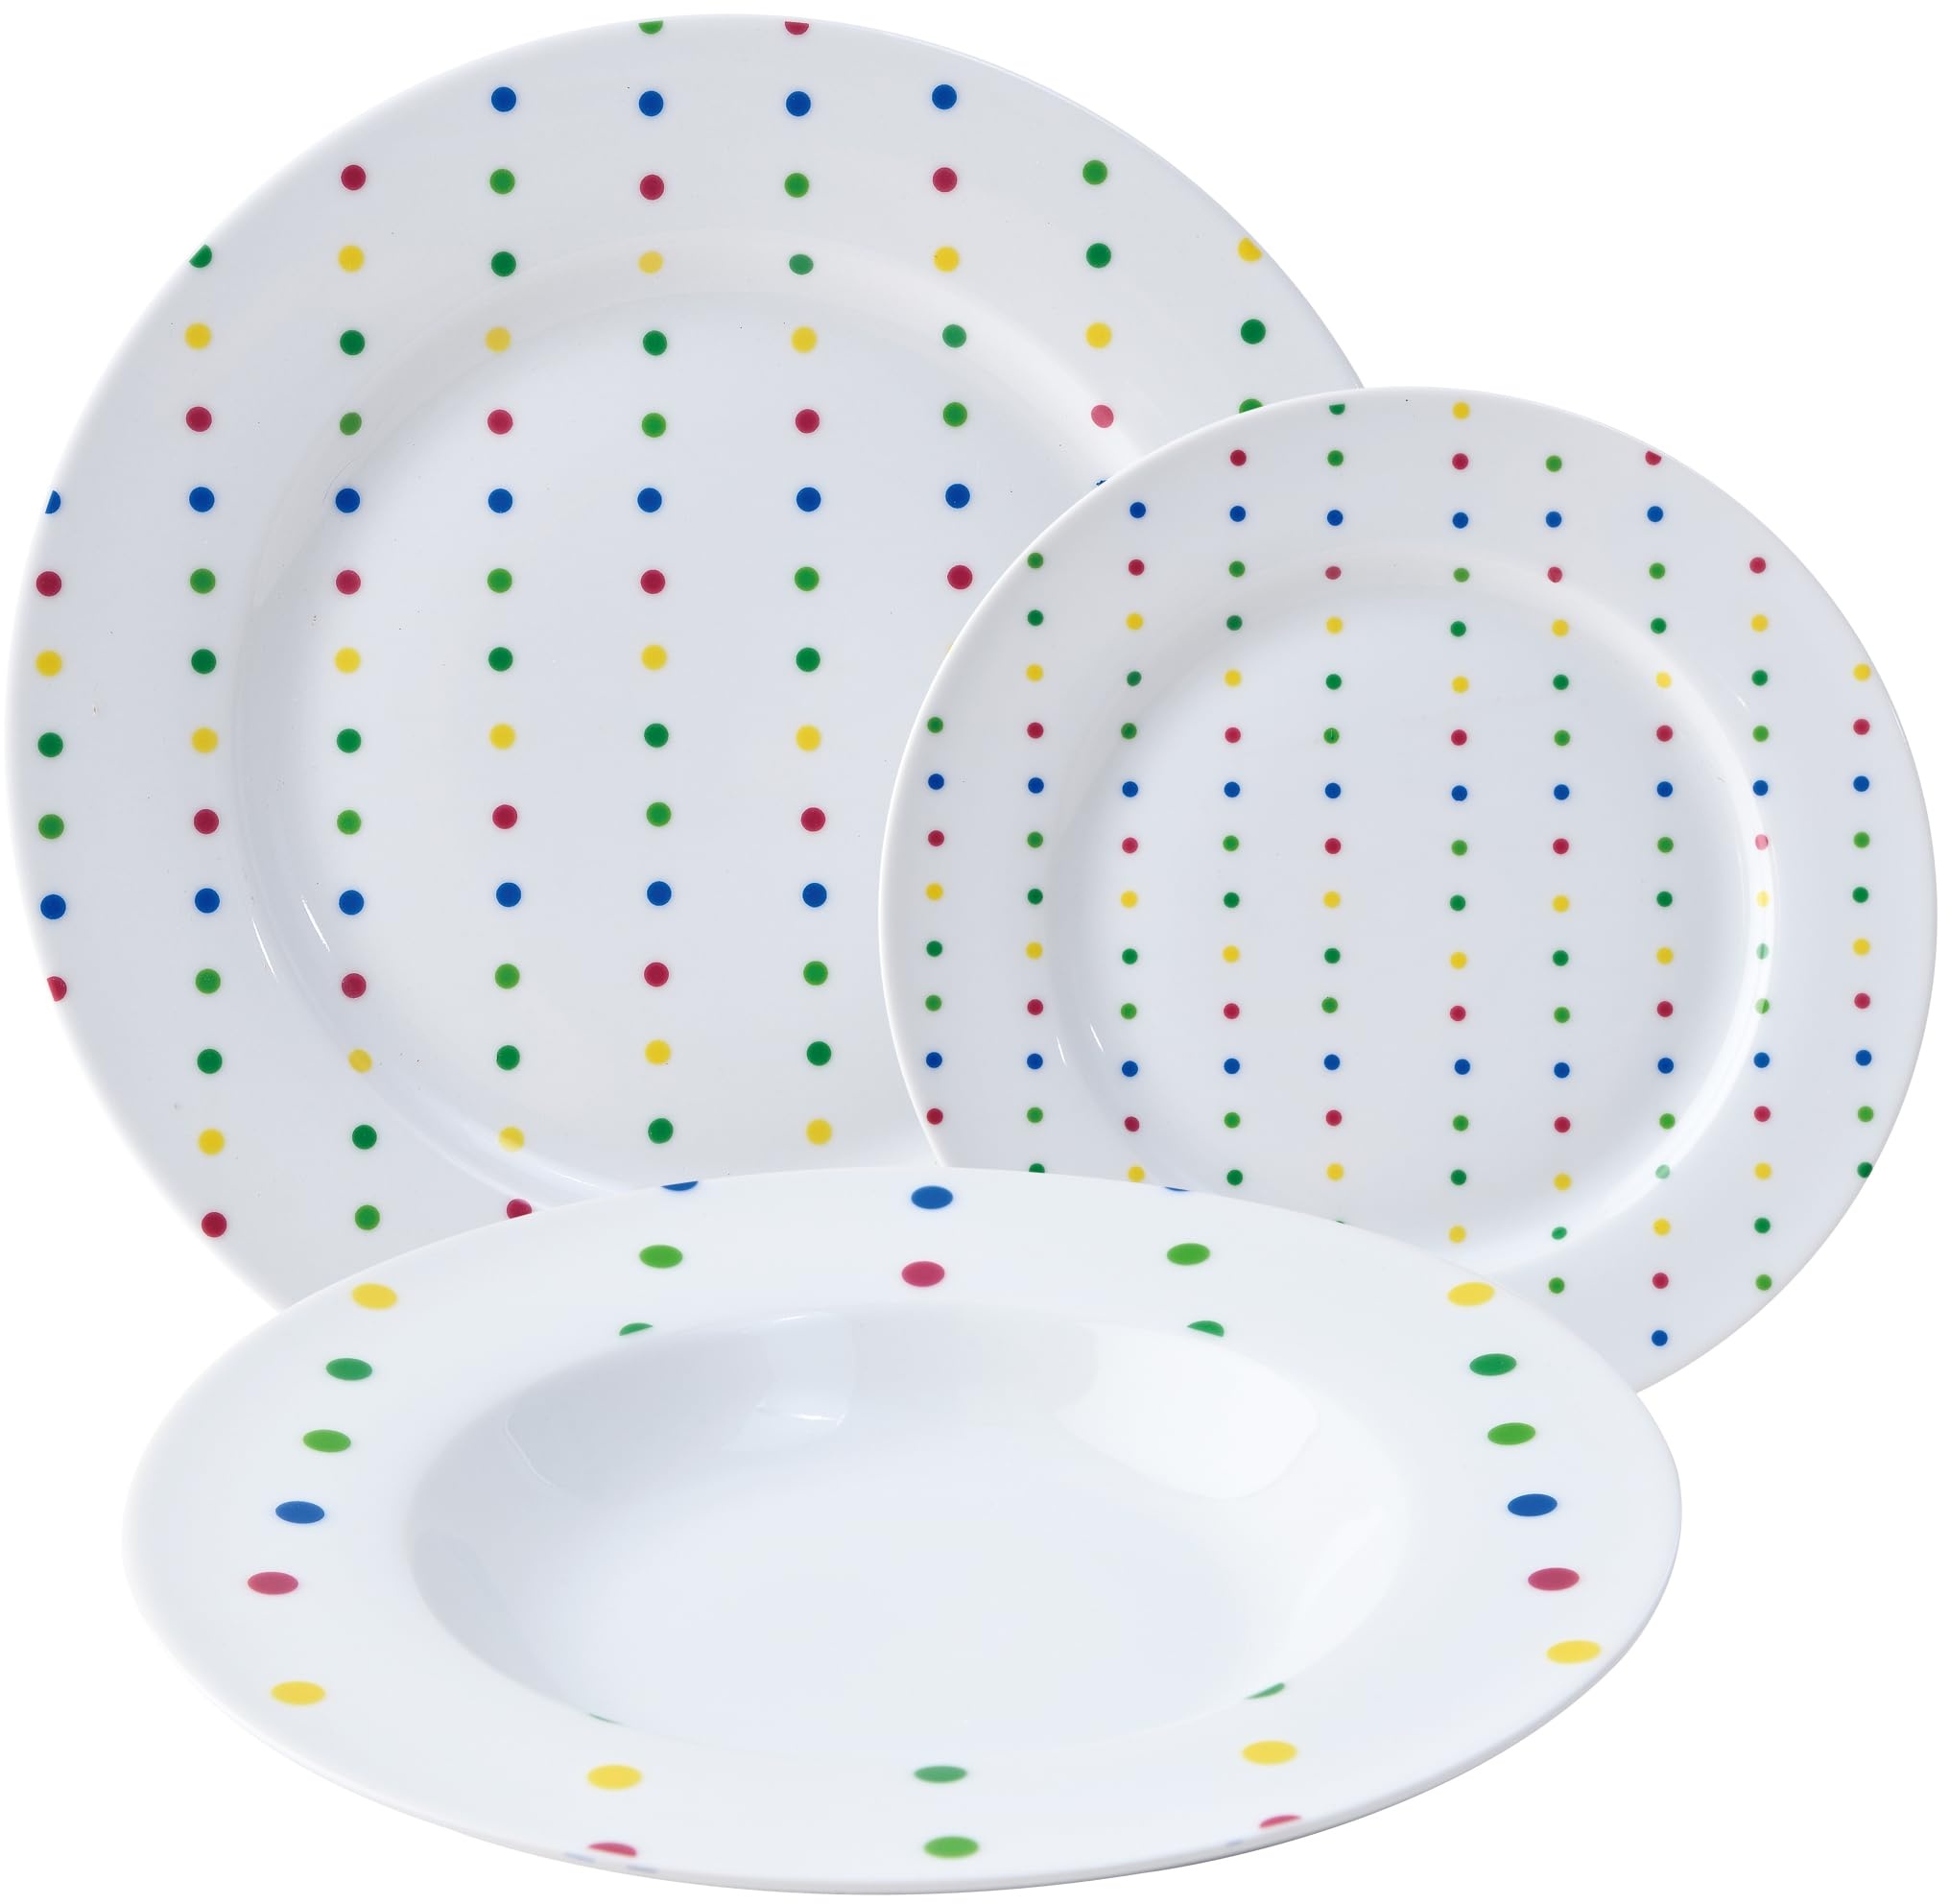 UNITED COLORS OF BENETTON. BE-0246 Platters, Porcelain, Mehrfarbig